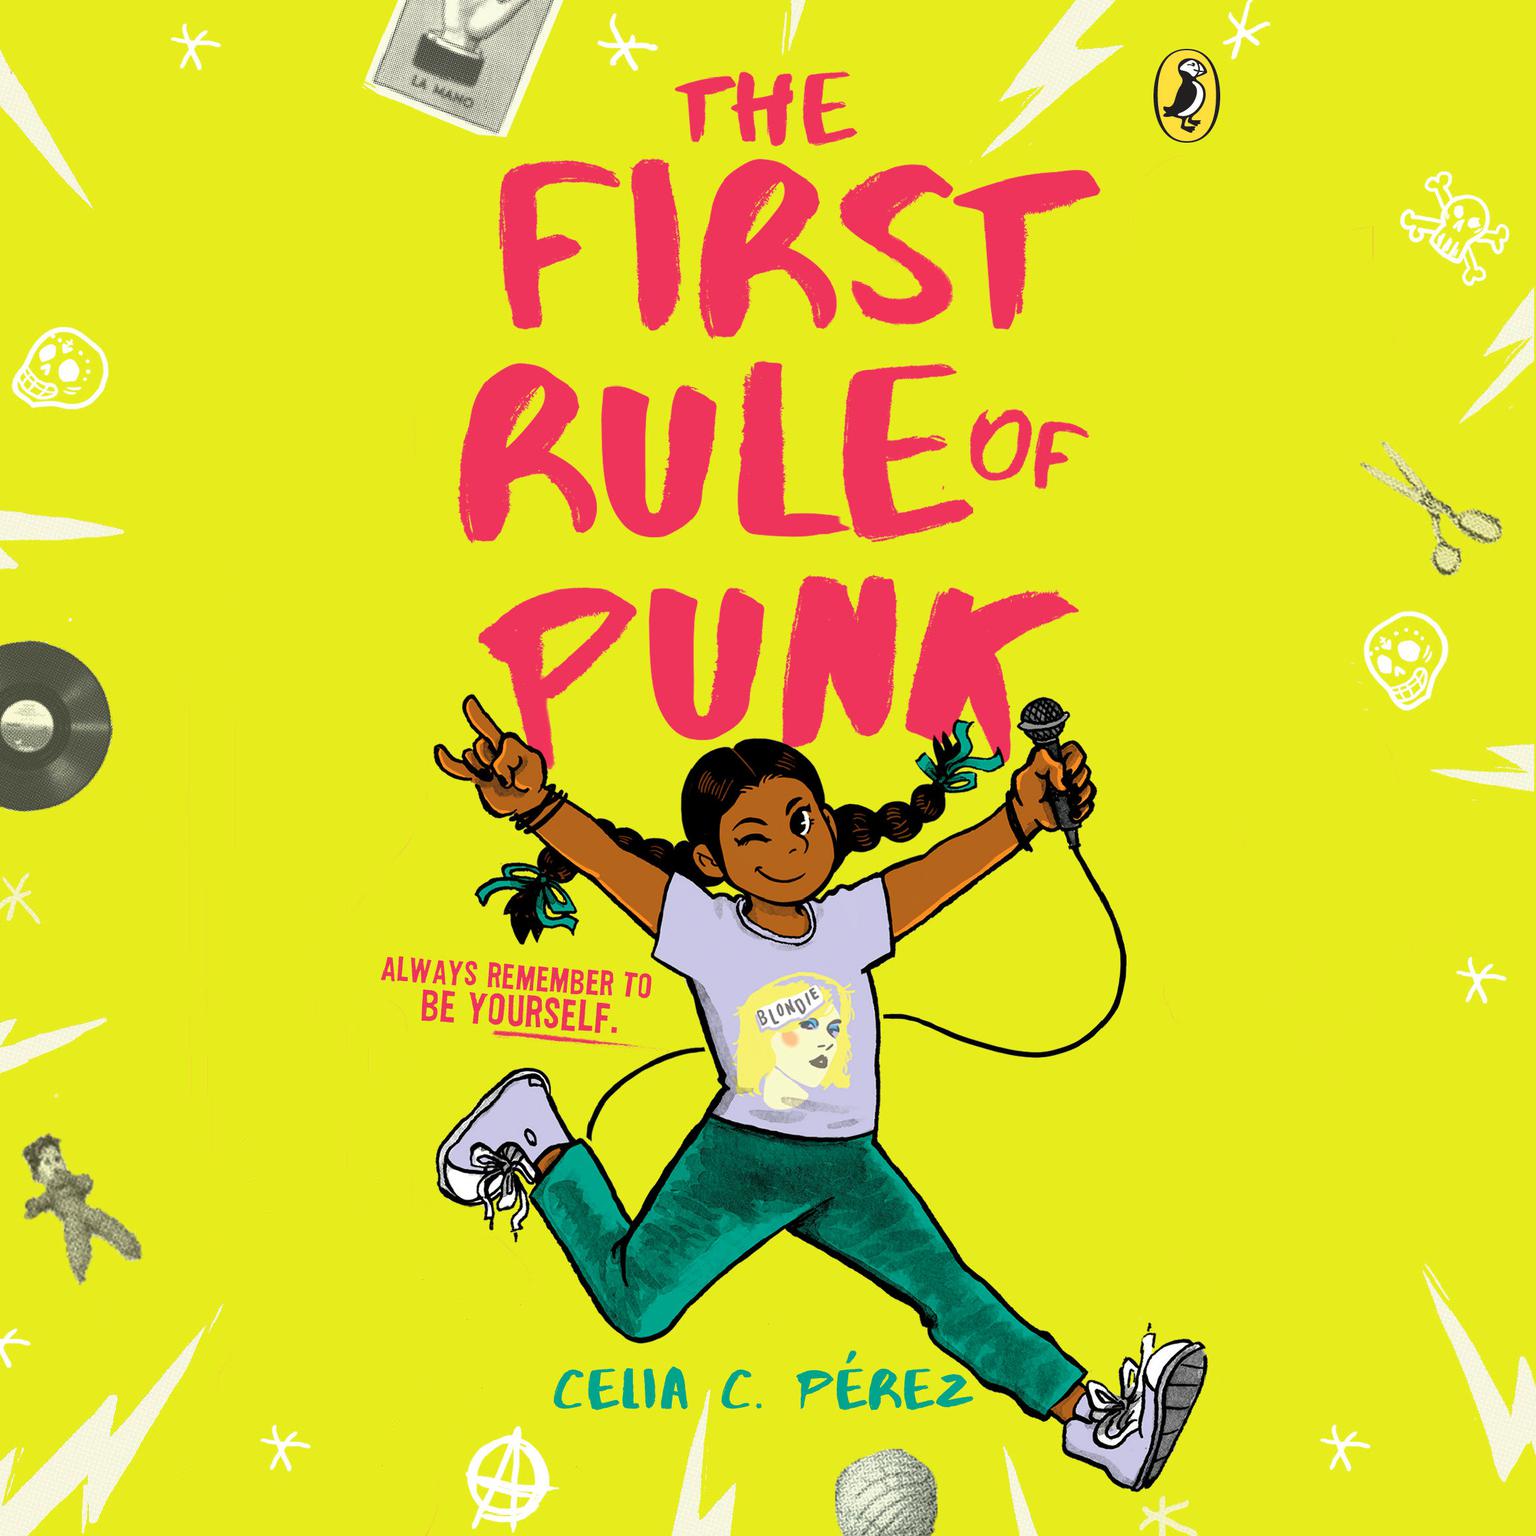 The First Rule of Punk Audiobook, by Celia C. Perez